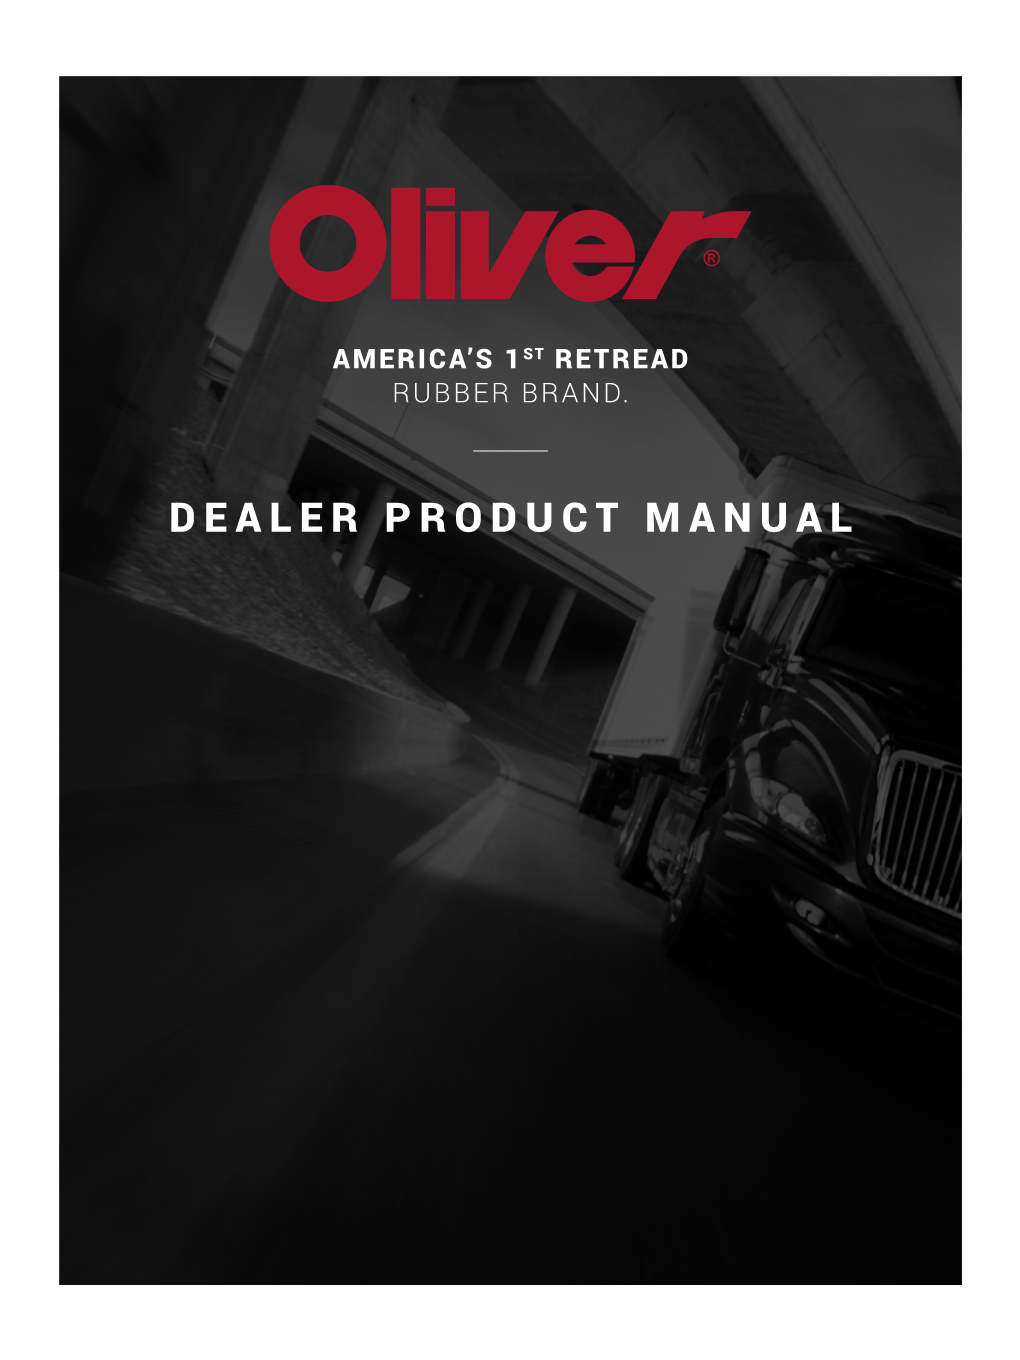 Dealer Product Manual Table of Contents